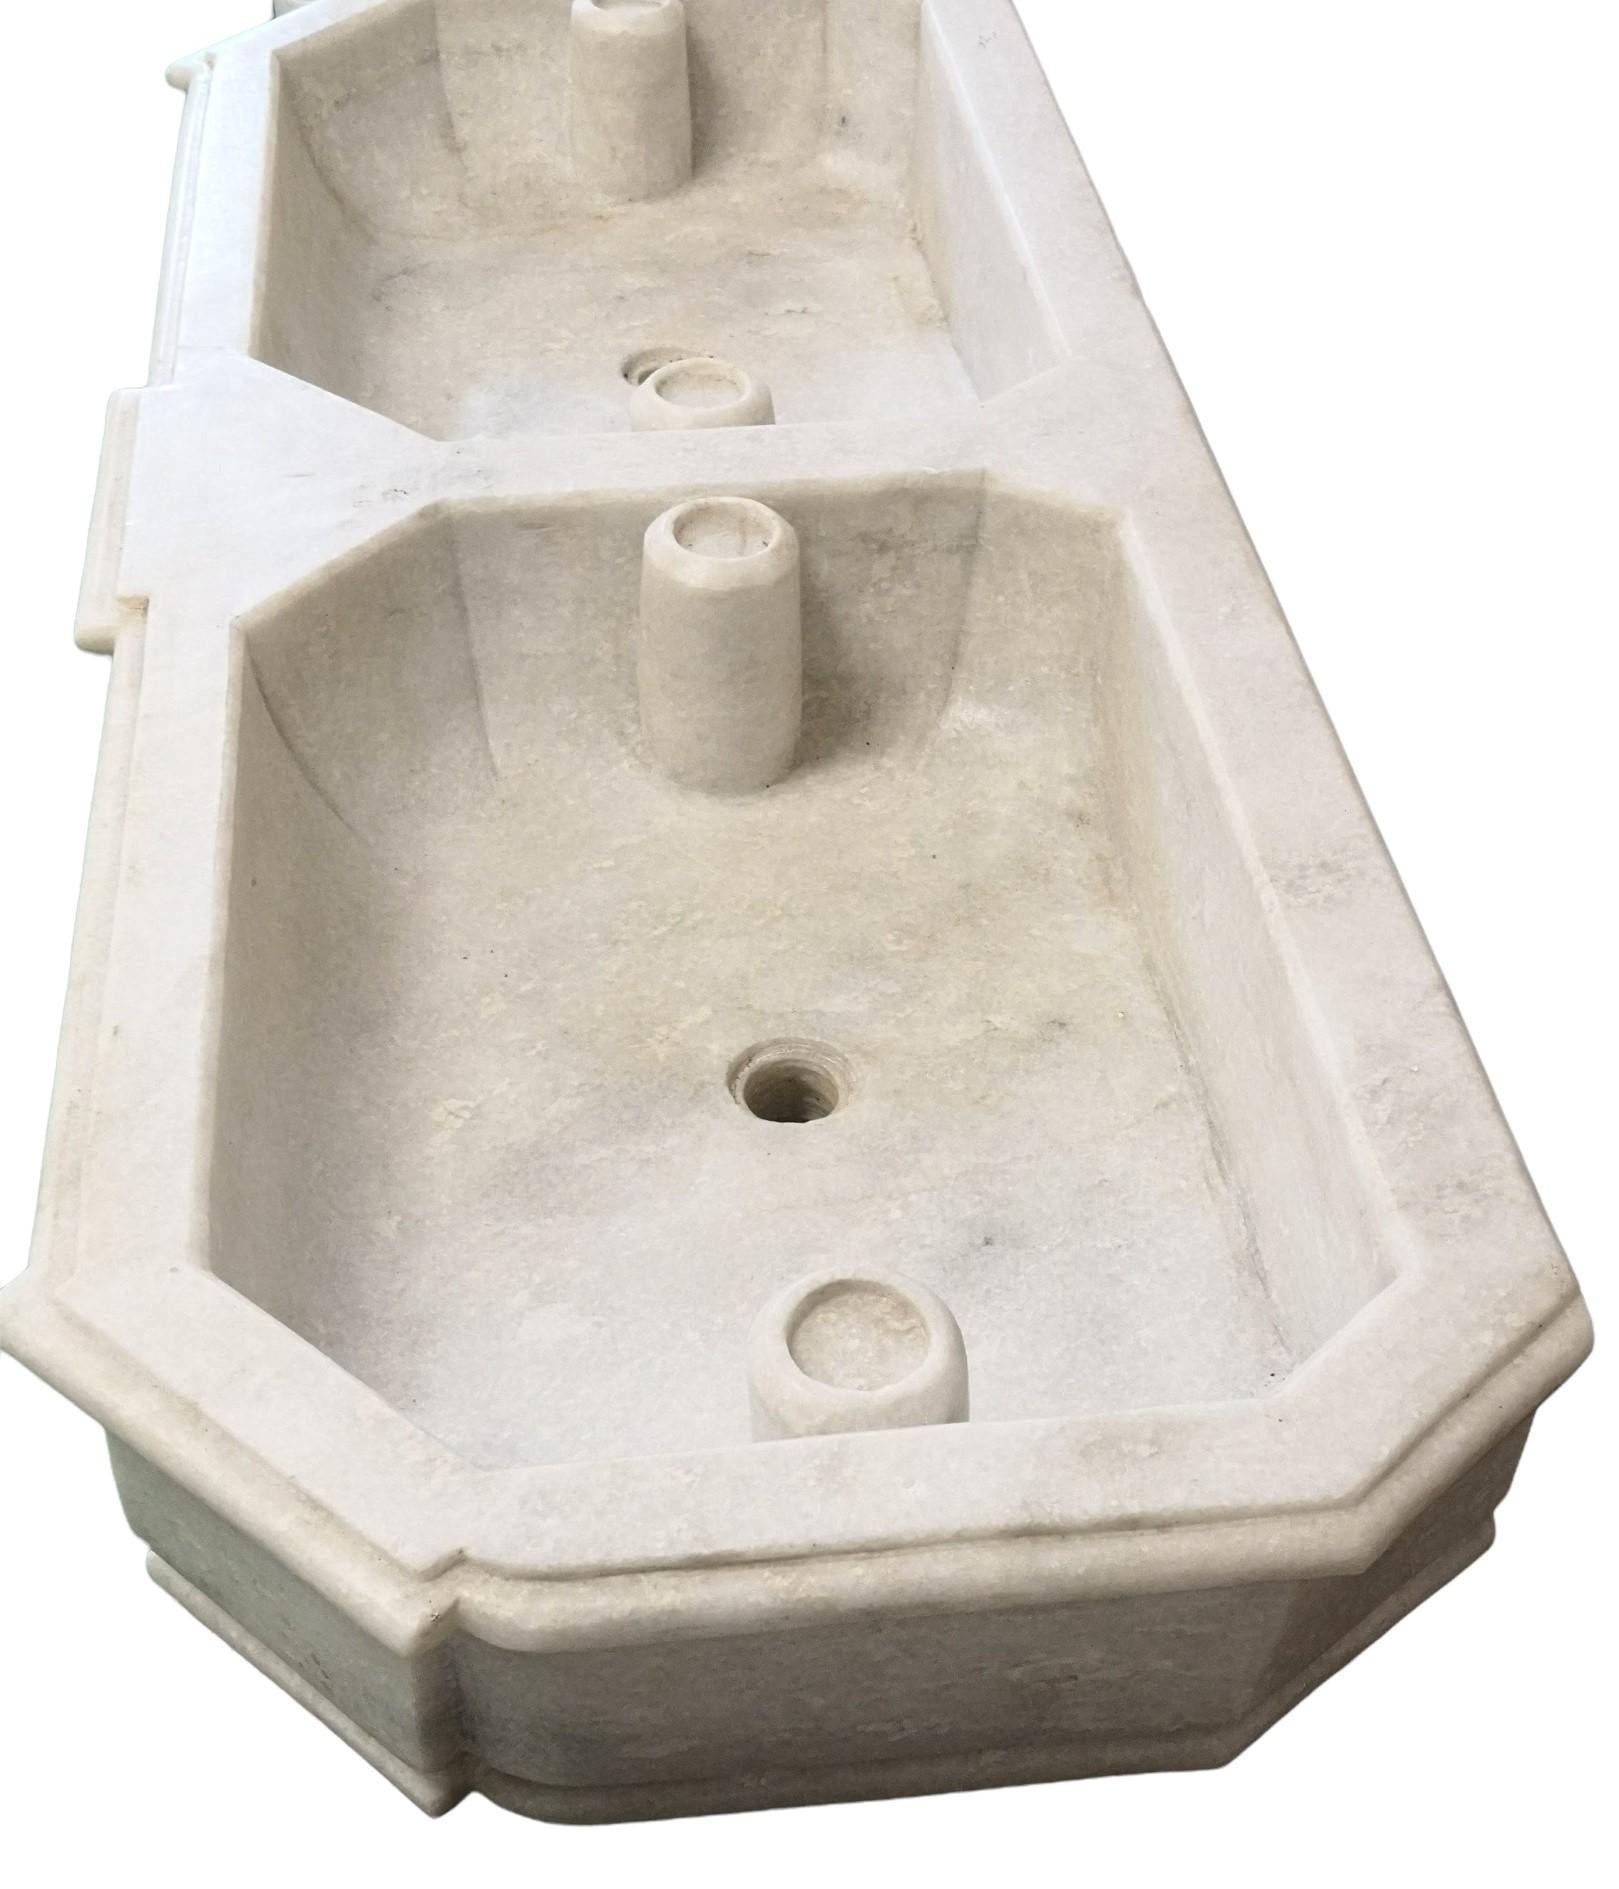 This timeless beautiful Italian classical double sink is cut from one single block of marble, the design has not changed since Greek and Roman times, it carries superb artistic merit easily fitting in with old and new buildings. It also makes an